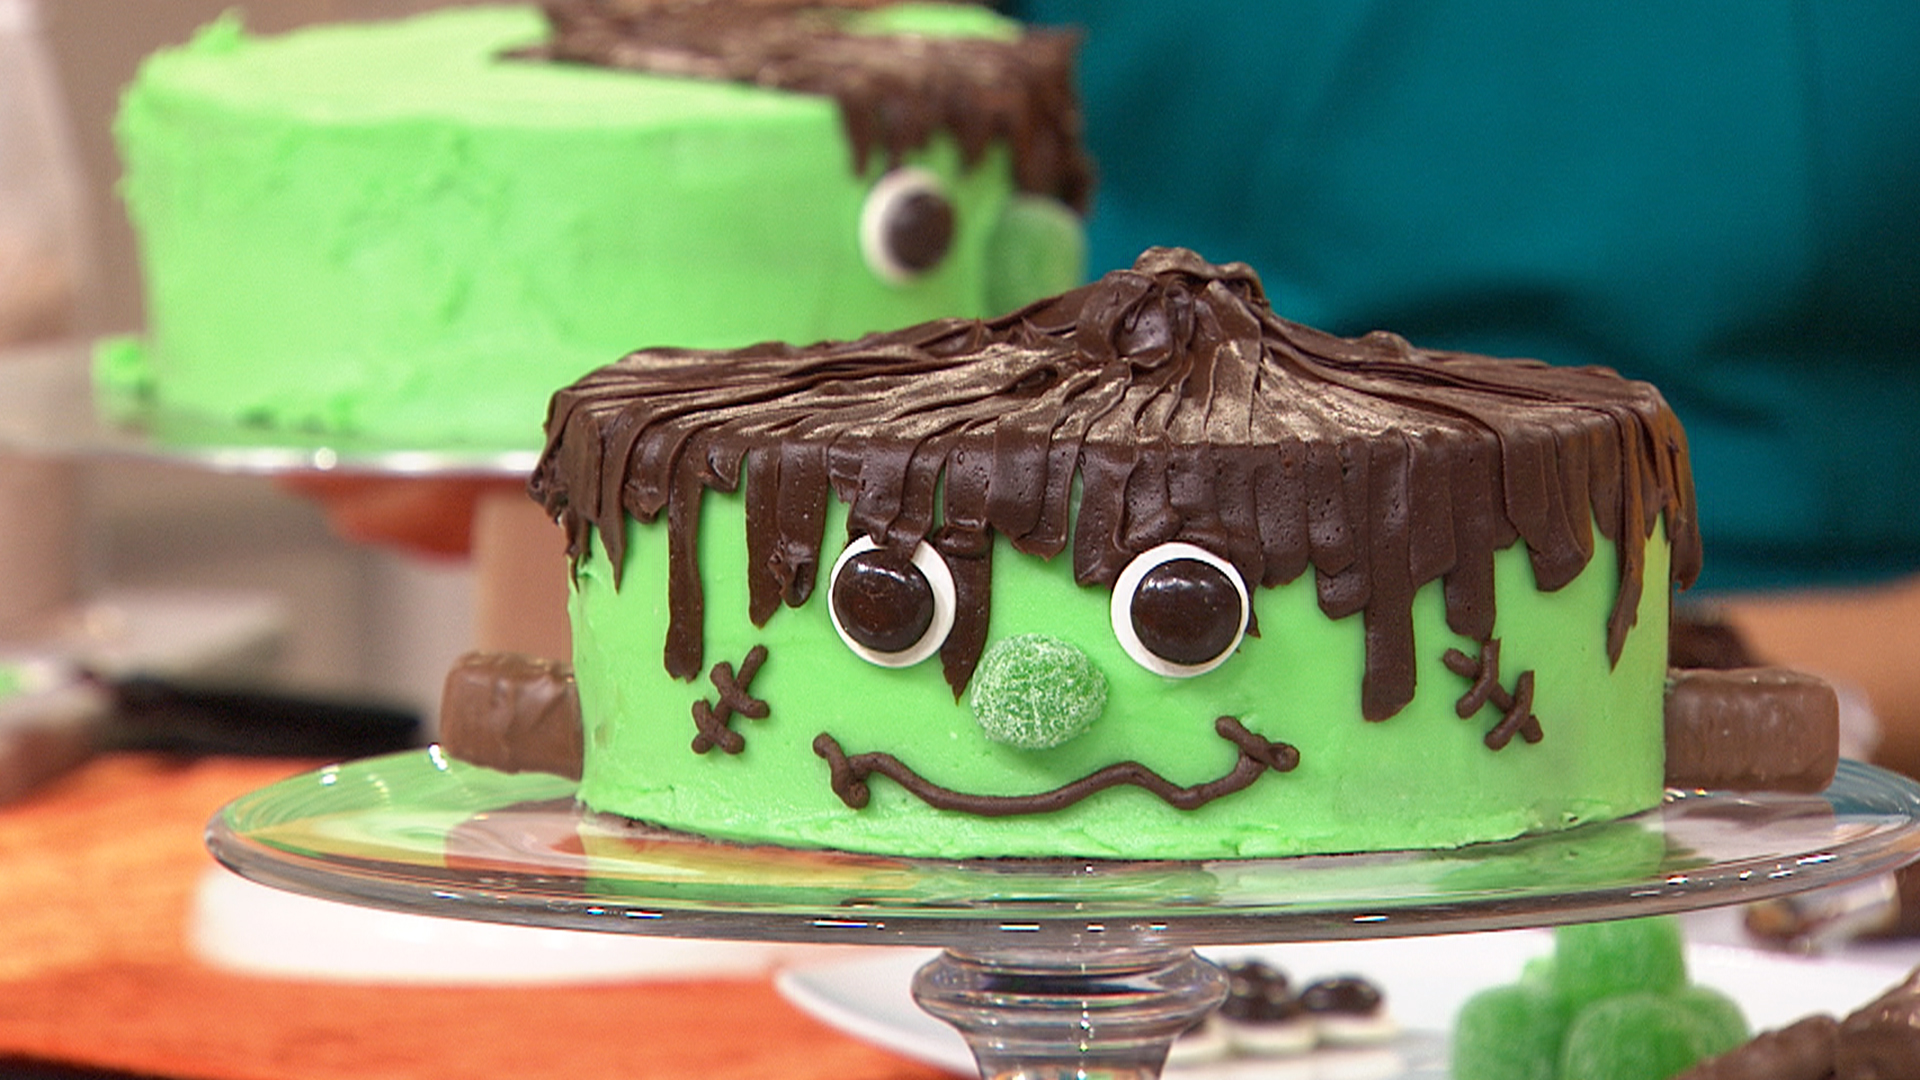 Creative Halloween cakes to serve at your Halloween bash.